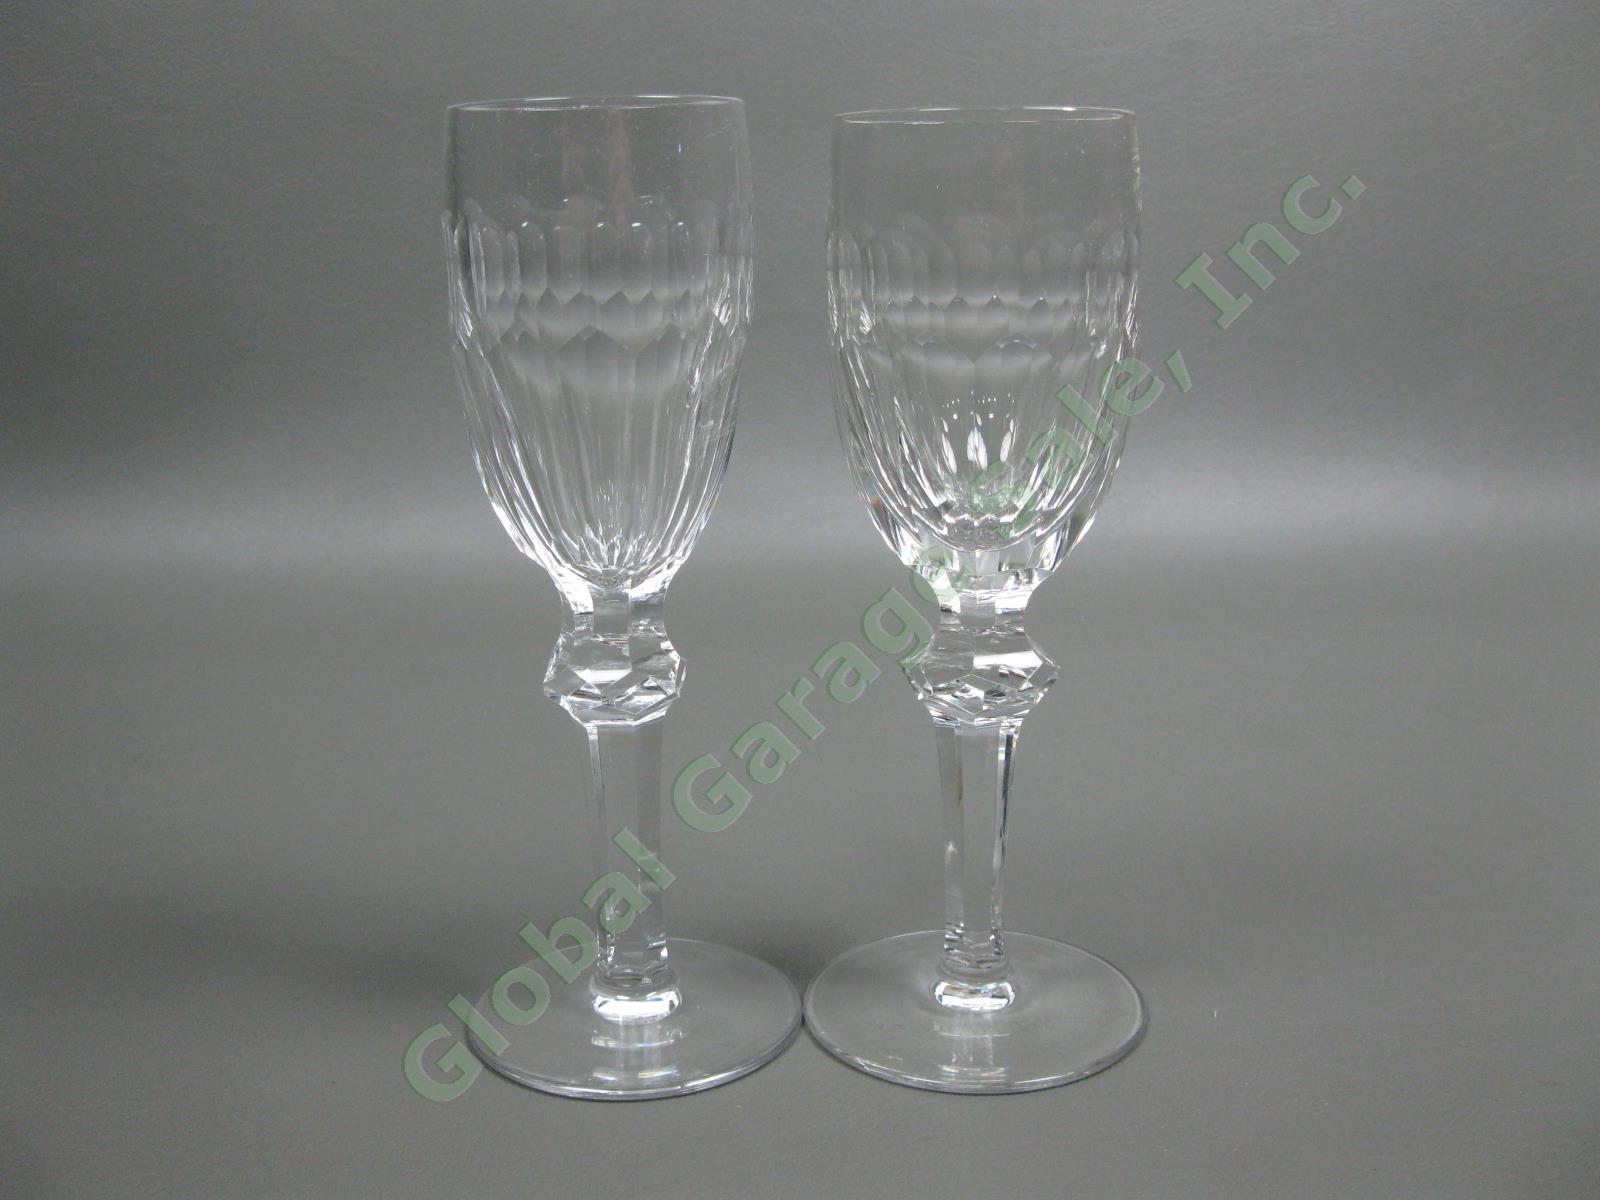 6 Waterford Crystal Curraghmore Sherry Wine Glasses Ireland Blown Cut Glass Set 7